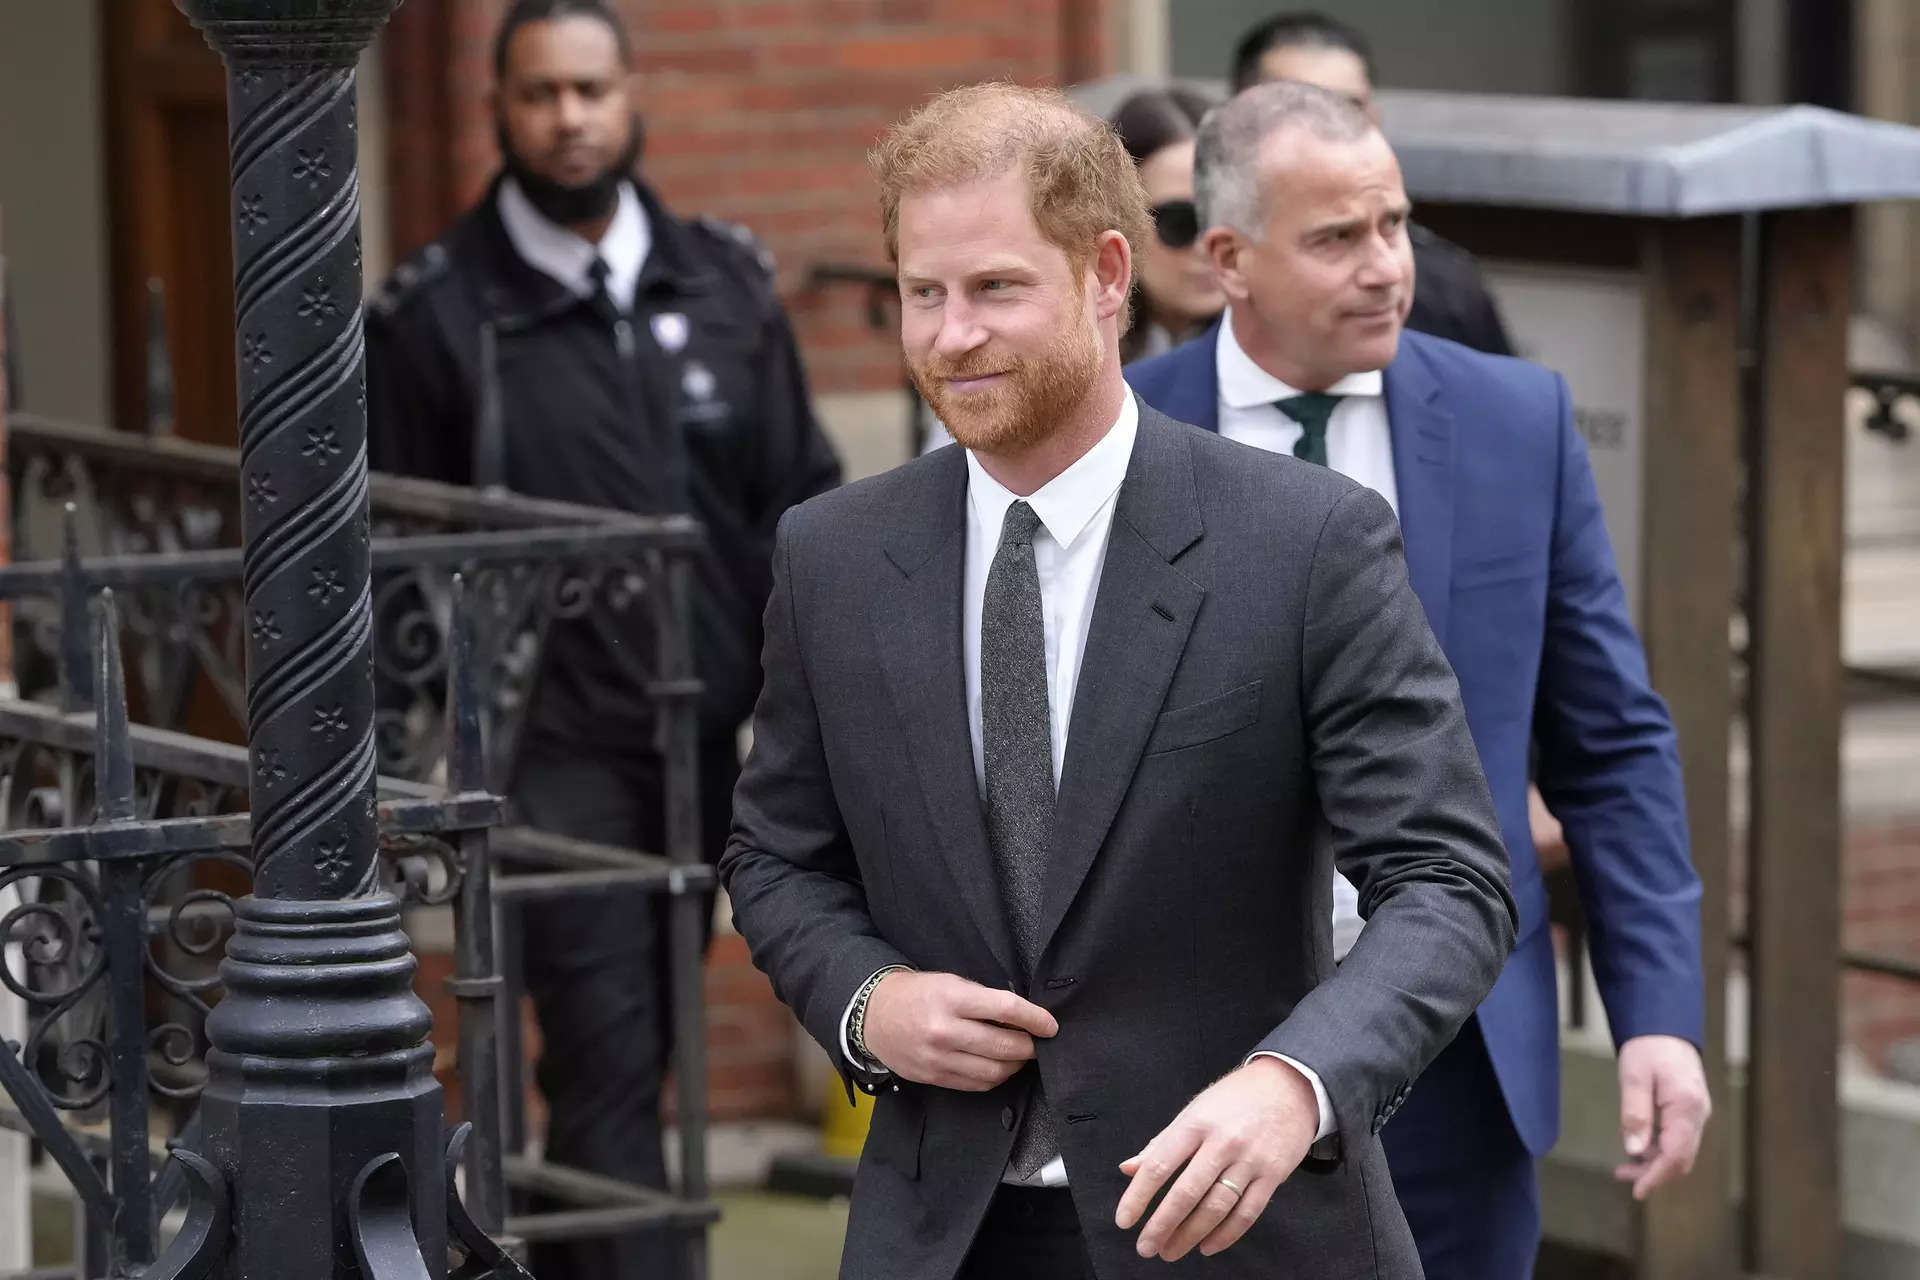 Prince Harry: Why is Prince Harry giving evidence in court? The